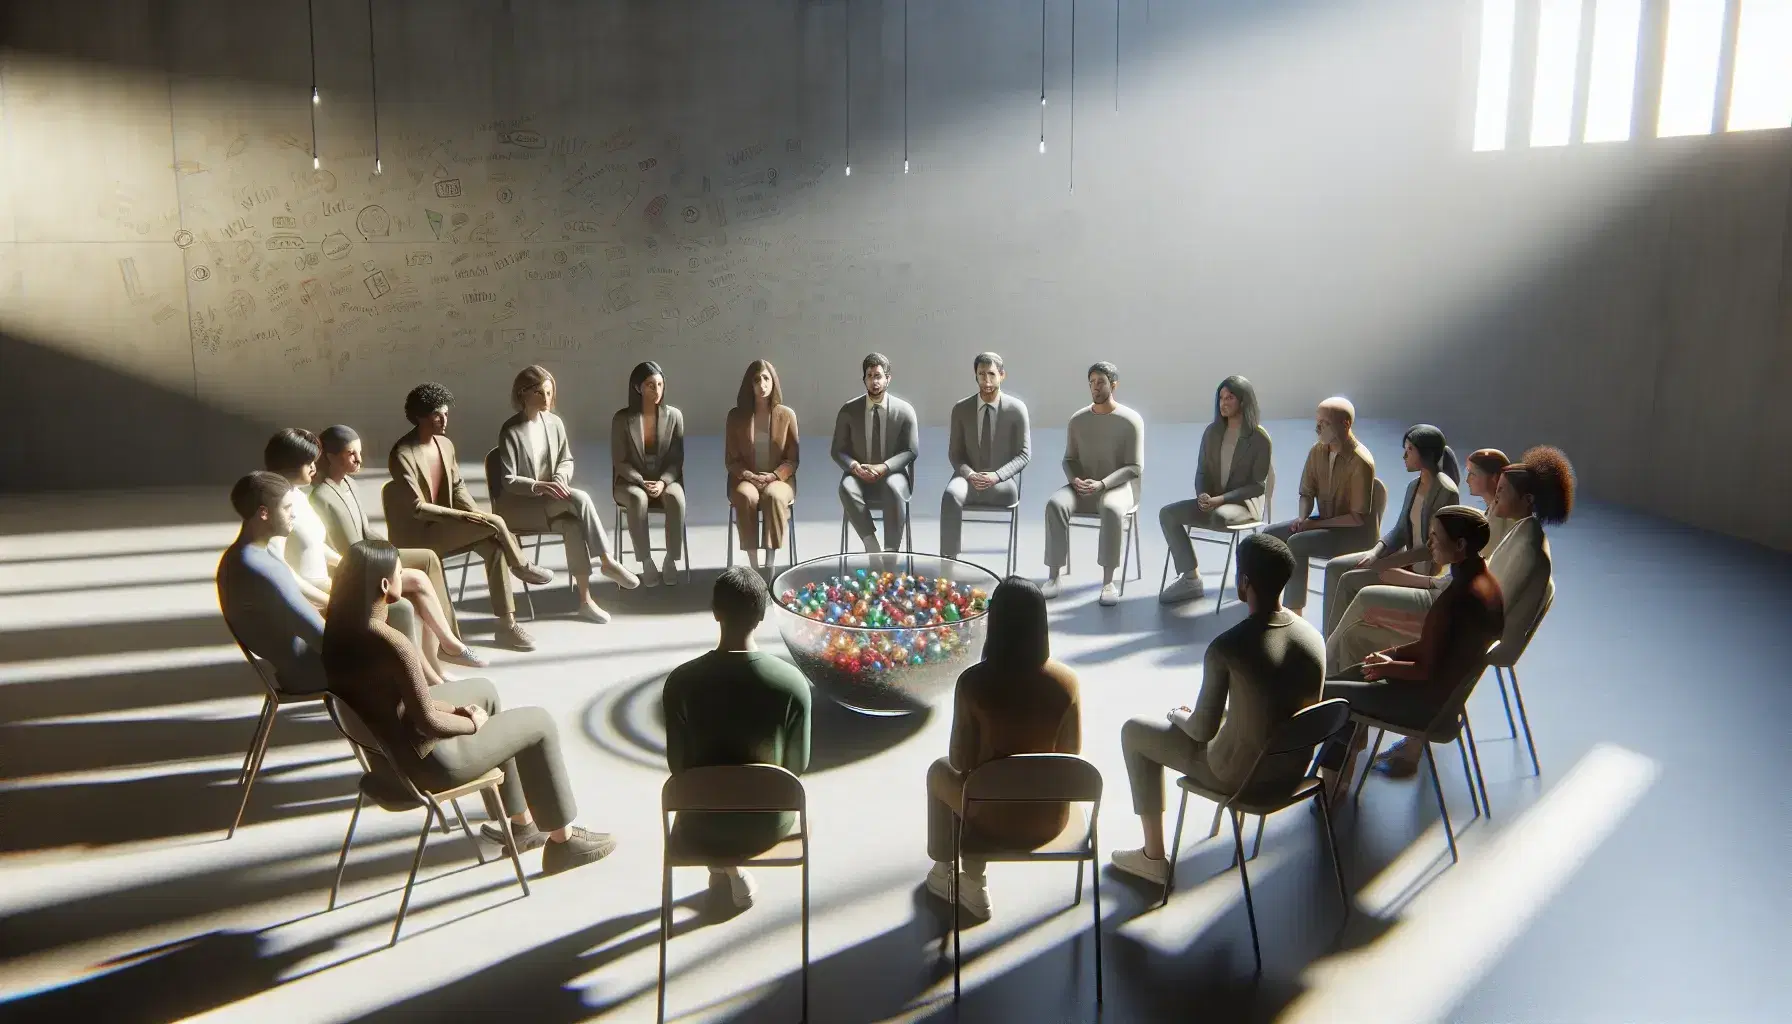 Multi-ethnic group sitting in a circle in a bright room with a transparent bowl full of colored stones in the center.